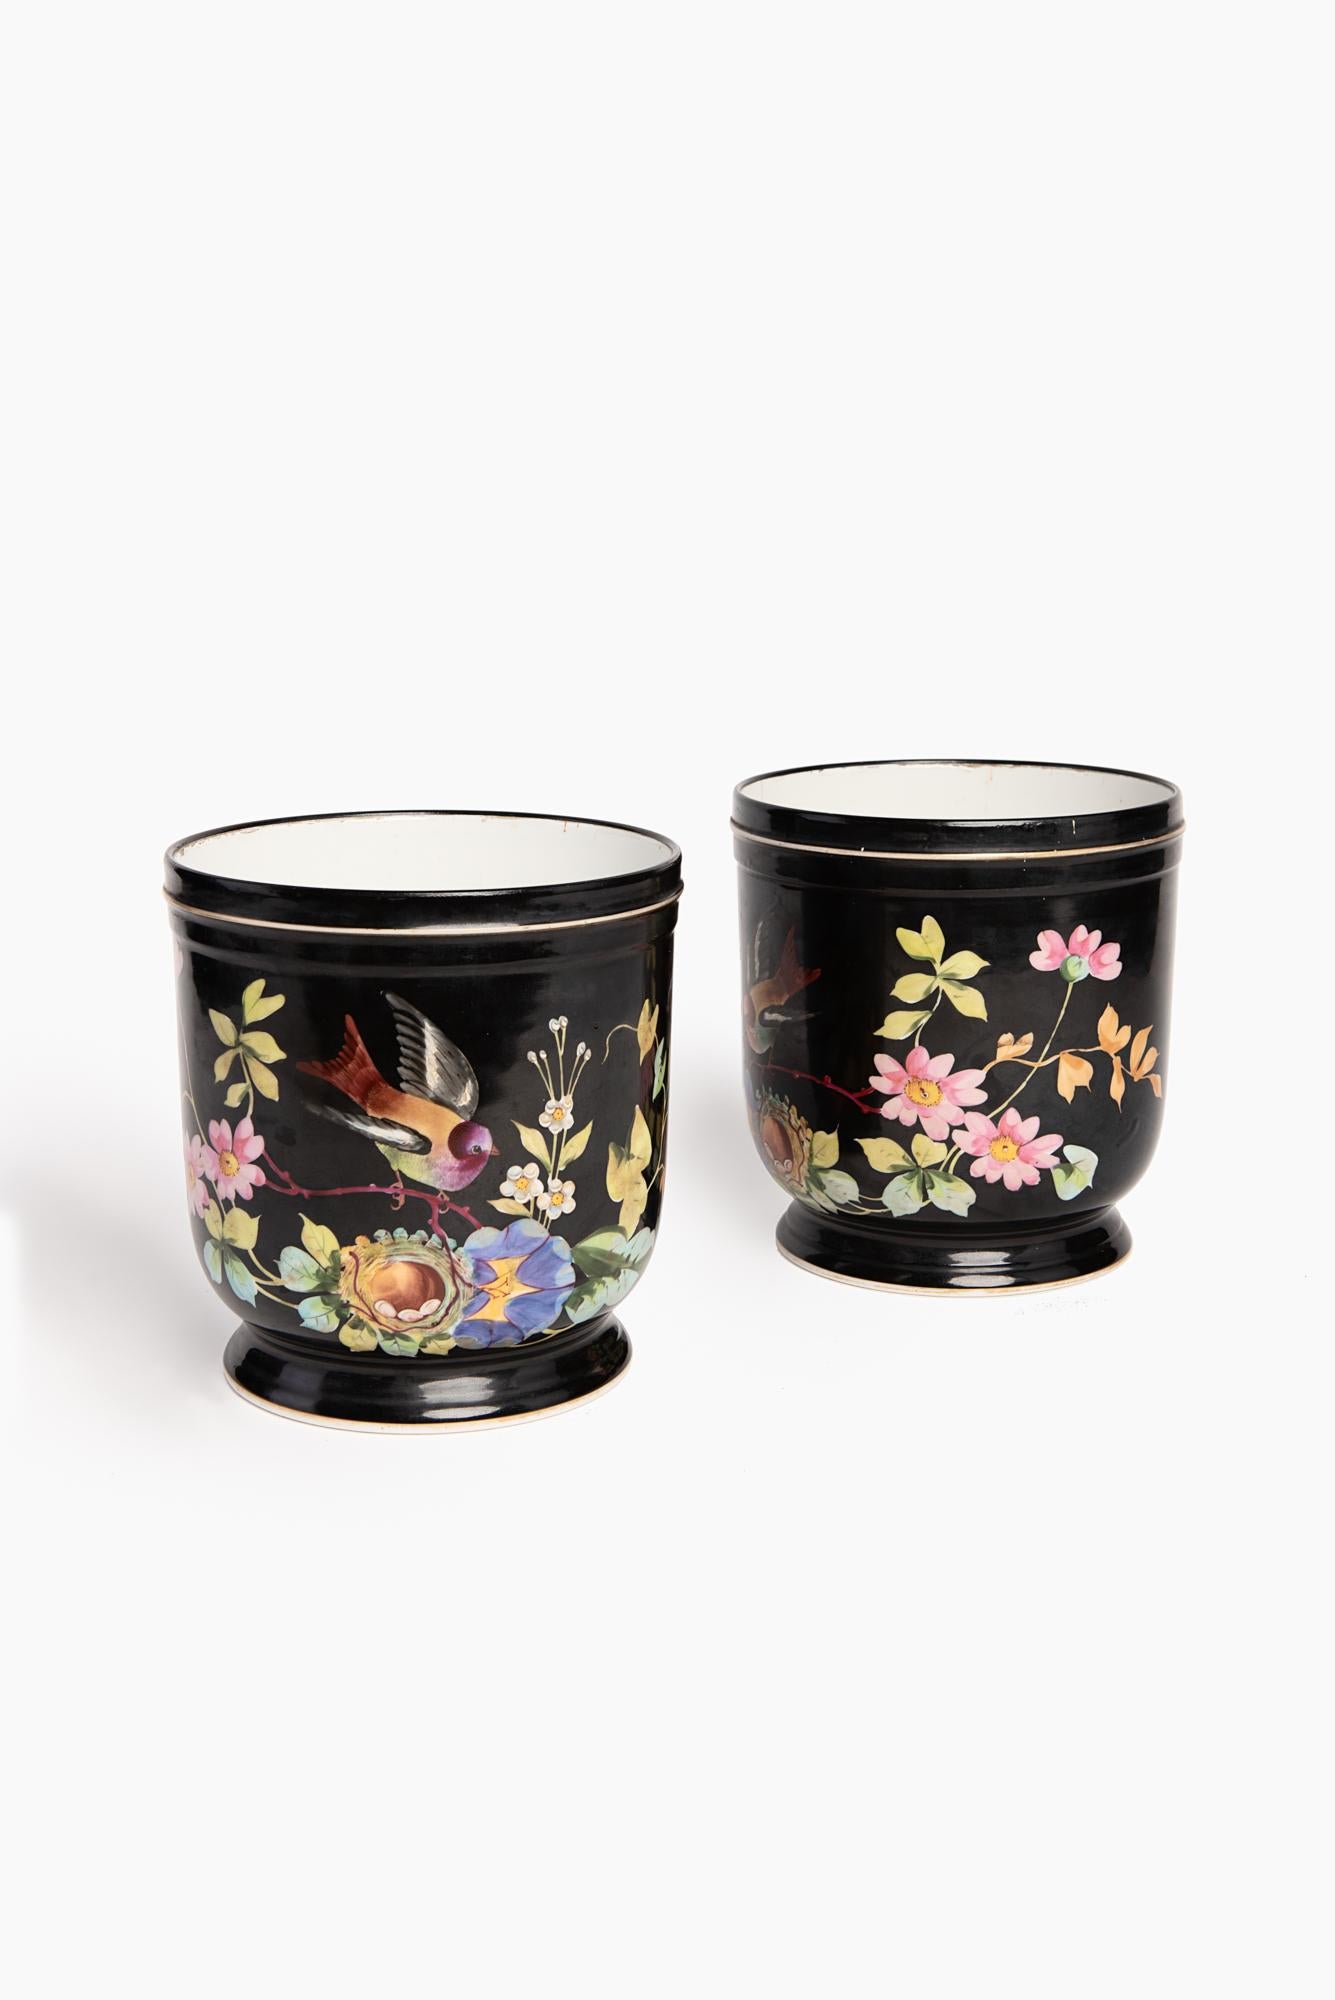  19th-century pair of French Napoleon III handmade decorated cachepots, 1880. NOTICE: DUE TO THE CURRENT  COVID-19 SITUATION, THE SHIPPING OF ITEMS MAY BE SLIGHTLY DELAYED. HOWEVER, ALL OF OUR ITEMS ARE AVAILABLE, WE ARE ALSO OPEN FOR BUSINESS AS